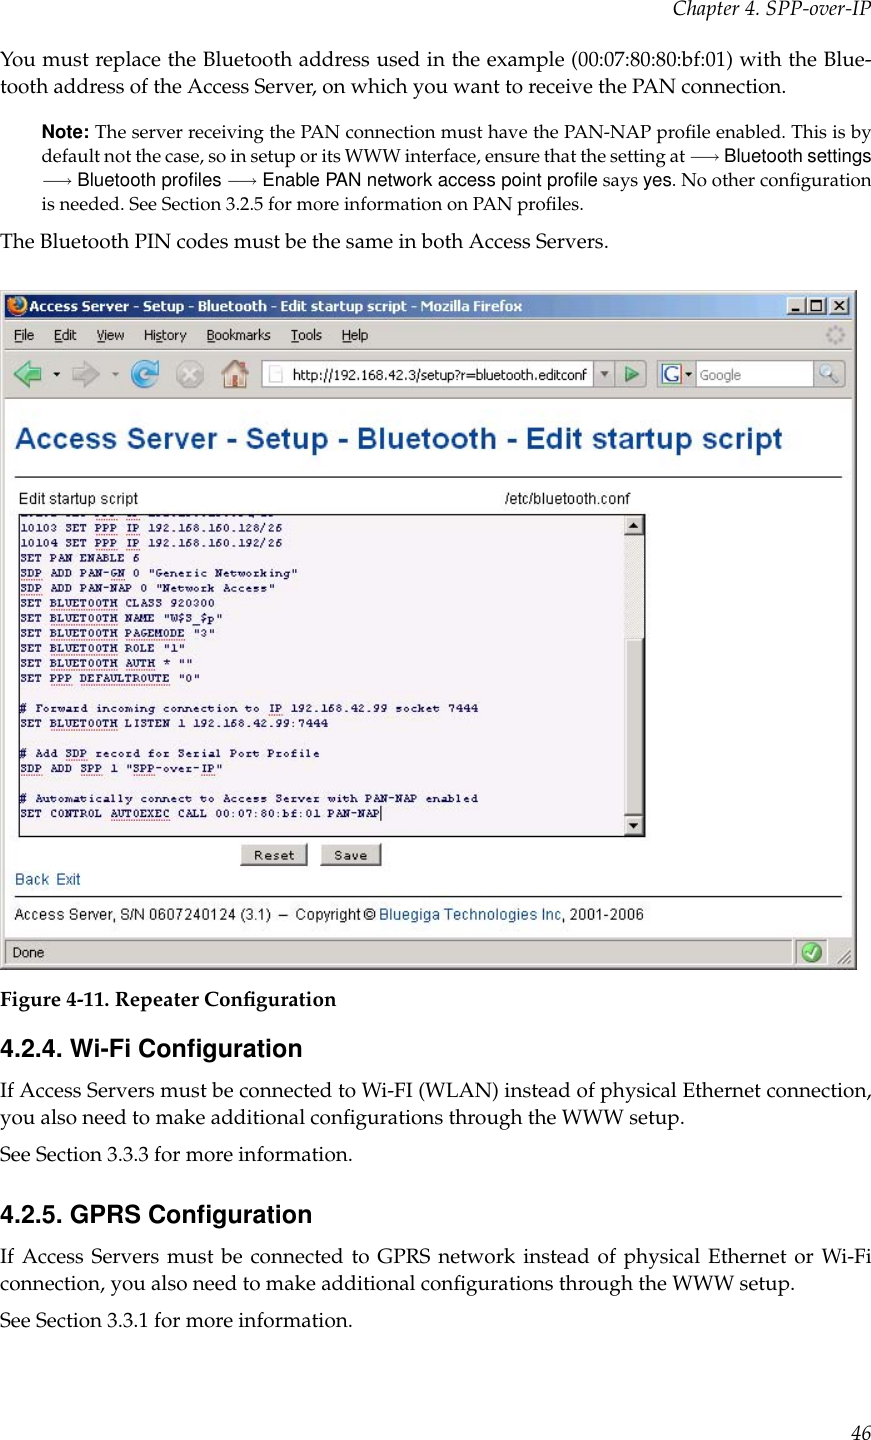 Chapter 4. SPP-over-IPYou must replace the Bluetooth address used in the example (00:07:80:80:bf:01) with the Blue-tooth address of the Access Server, on which you want to receive the PAN connection.Note: The server receiving the PAN connection must have the PAN-NAP proﬁle enabled. This is bydefault not the case, so in setup or its WWW interface, ensure that the setting at −→ Bluetooth settings−→ Bluetooth proﬁles −→ Enable PAN network access point proﬁle says yes. No other conﬁgurationis needed. See Section 3.2.5 for more information on PAN proﬁles.The Bluetooth PIN codes must be the same in both Access Servers.Figure 4-11. Repeater Conﬁguration4.2.4. Wi-Fi ConﬁgurationIf Access Servers must be connected to Wi-FI (WLAN) instead of physical Ethernet connection,you also need to make additional conﬁgurations through the WWW setup.See Section 3.3.3 for more information.4.2.5. GPRS ConﬁgurationIf Access Servers must be connected to GPRS network instead of physical Ethernet or Wi-Ficonnection, you also need to make additional conﬁgurations through the WWW setup.See Section 3.3.1 for more information.46